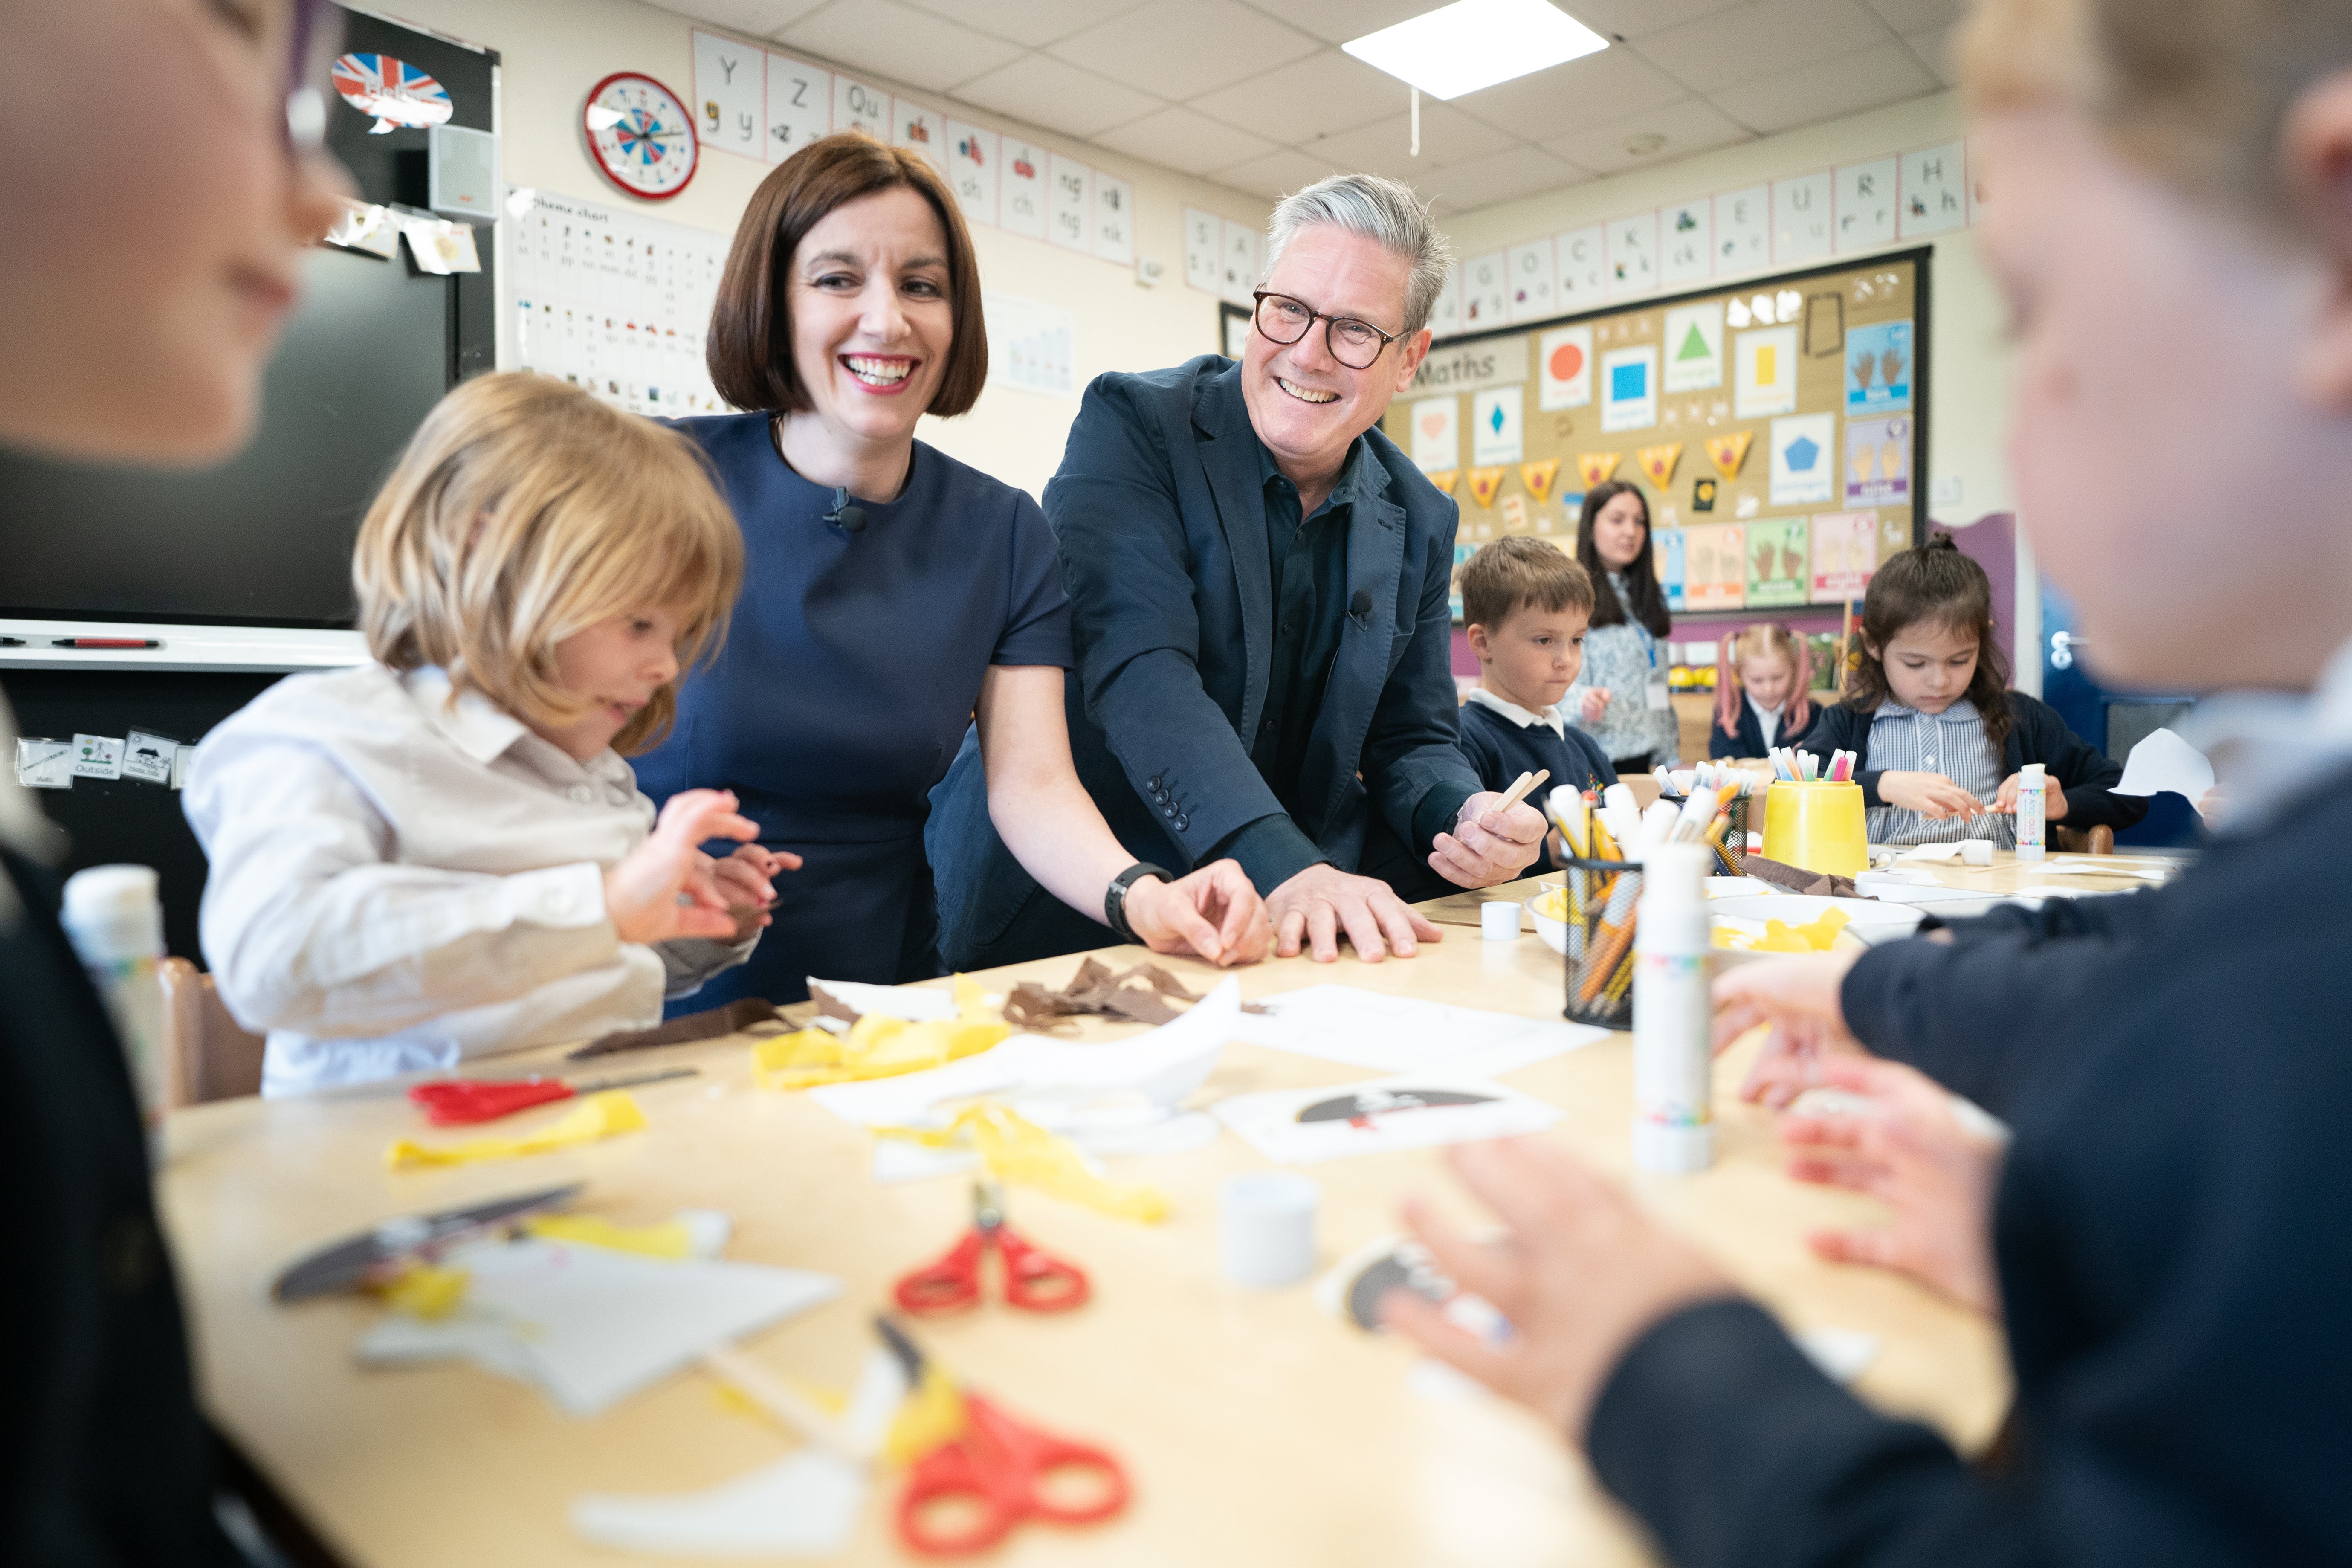 Keir Starmer and Bridget Phillipson during a campaign visit to a primary school in Nuneaton